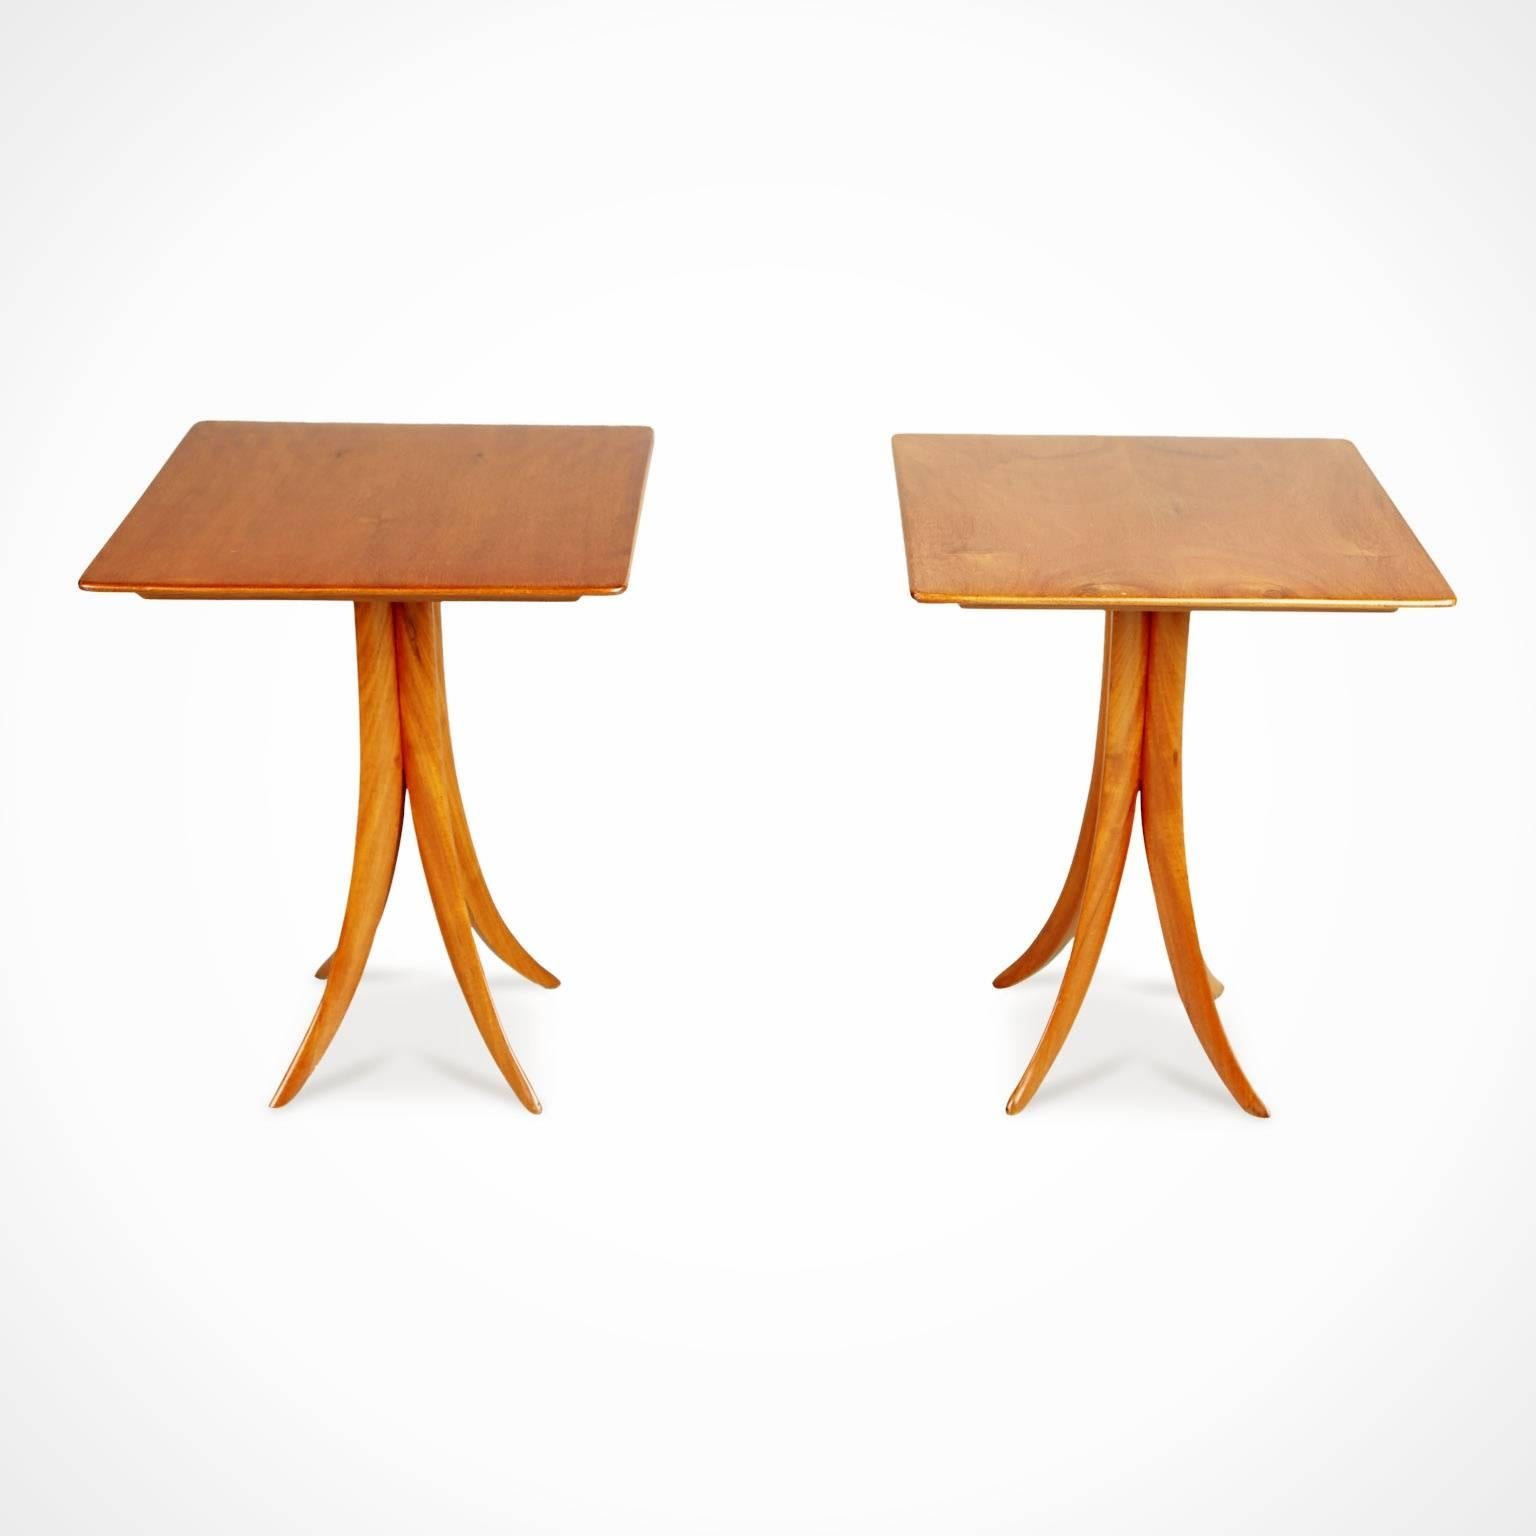 Newly imported from a private collector in Brazil, these sculptural side tables embody the use of curvaceous lines and soft shapes that Scapinelli was well known for. These newly imported pieces come from a private collector in Brazil and were once